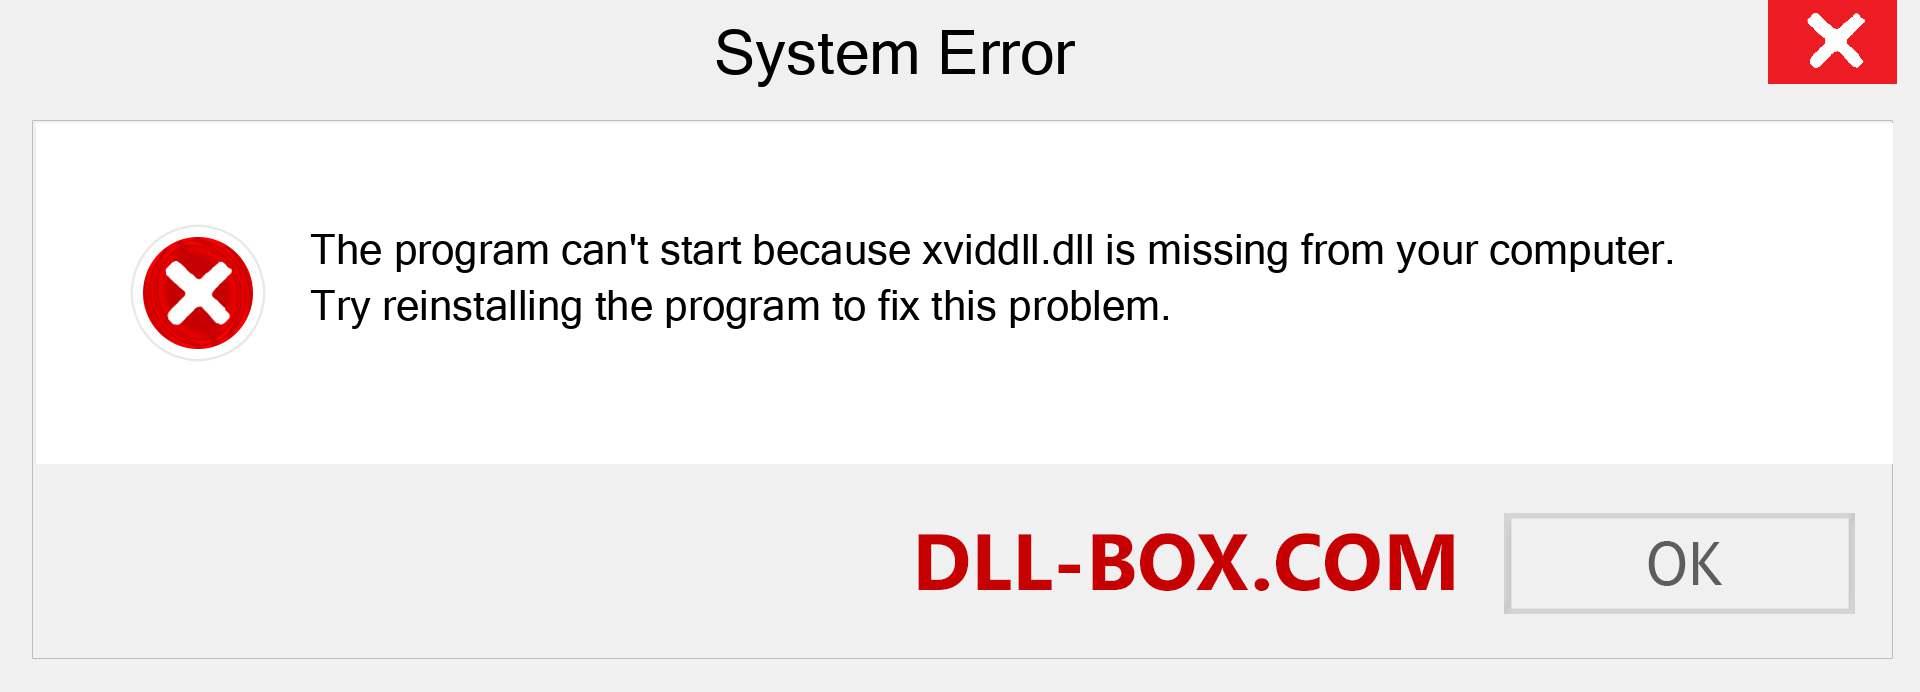  xviddll.dll file is missing?. Download for Windows 7, 8, 10 - Fix  xviddll dll Missing Error on Windows, photos, images